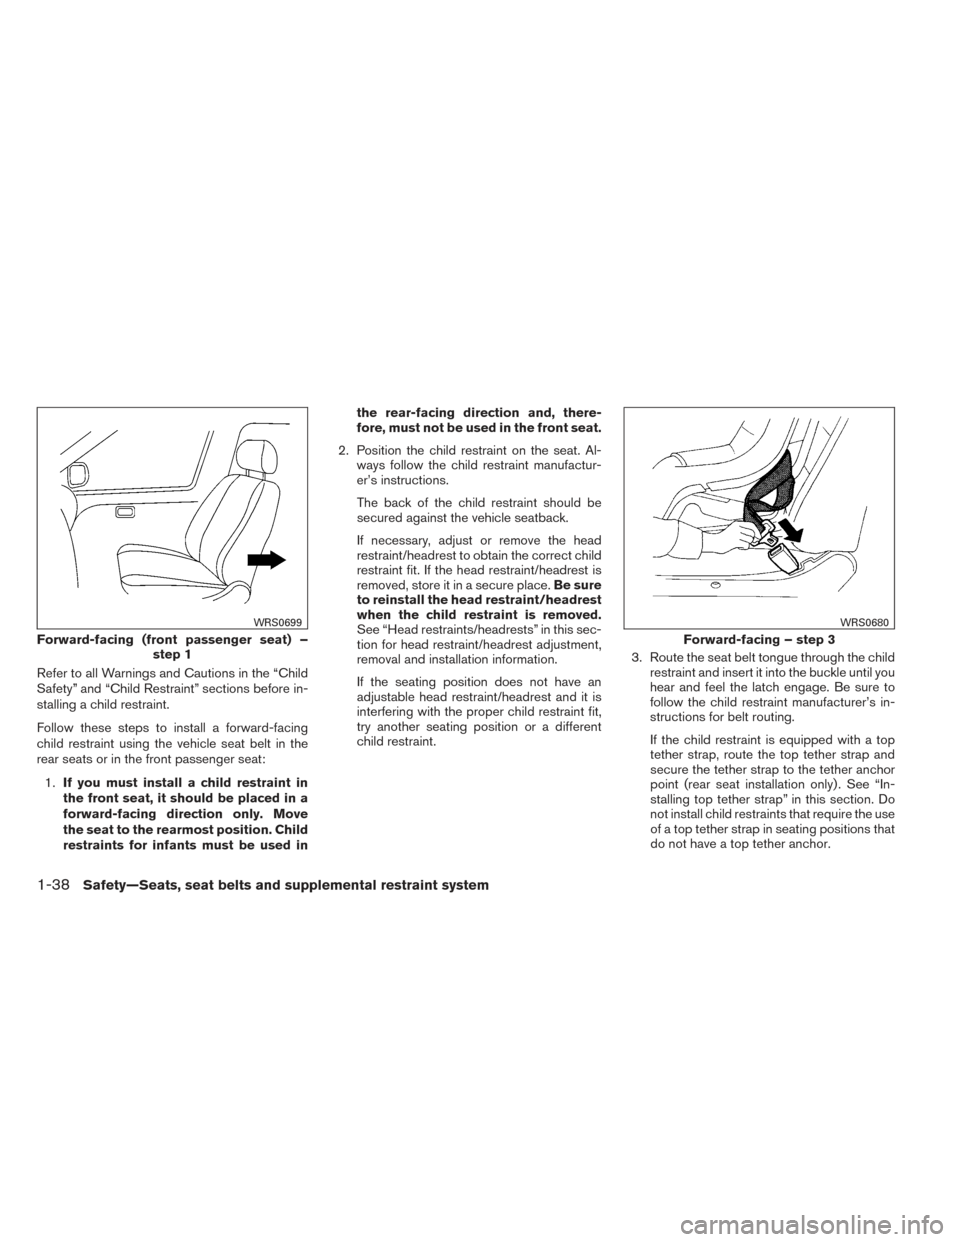 NISSAN XTERRA 2014 N50 / 2.G Workshop Manual Refer to all Warnings and Cautions in the “Child
Safety” and “Child Restraint” sections before in-
stalling a child restraint.
Follow these steps to install a forward-facing
child restraint us